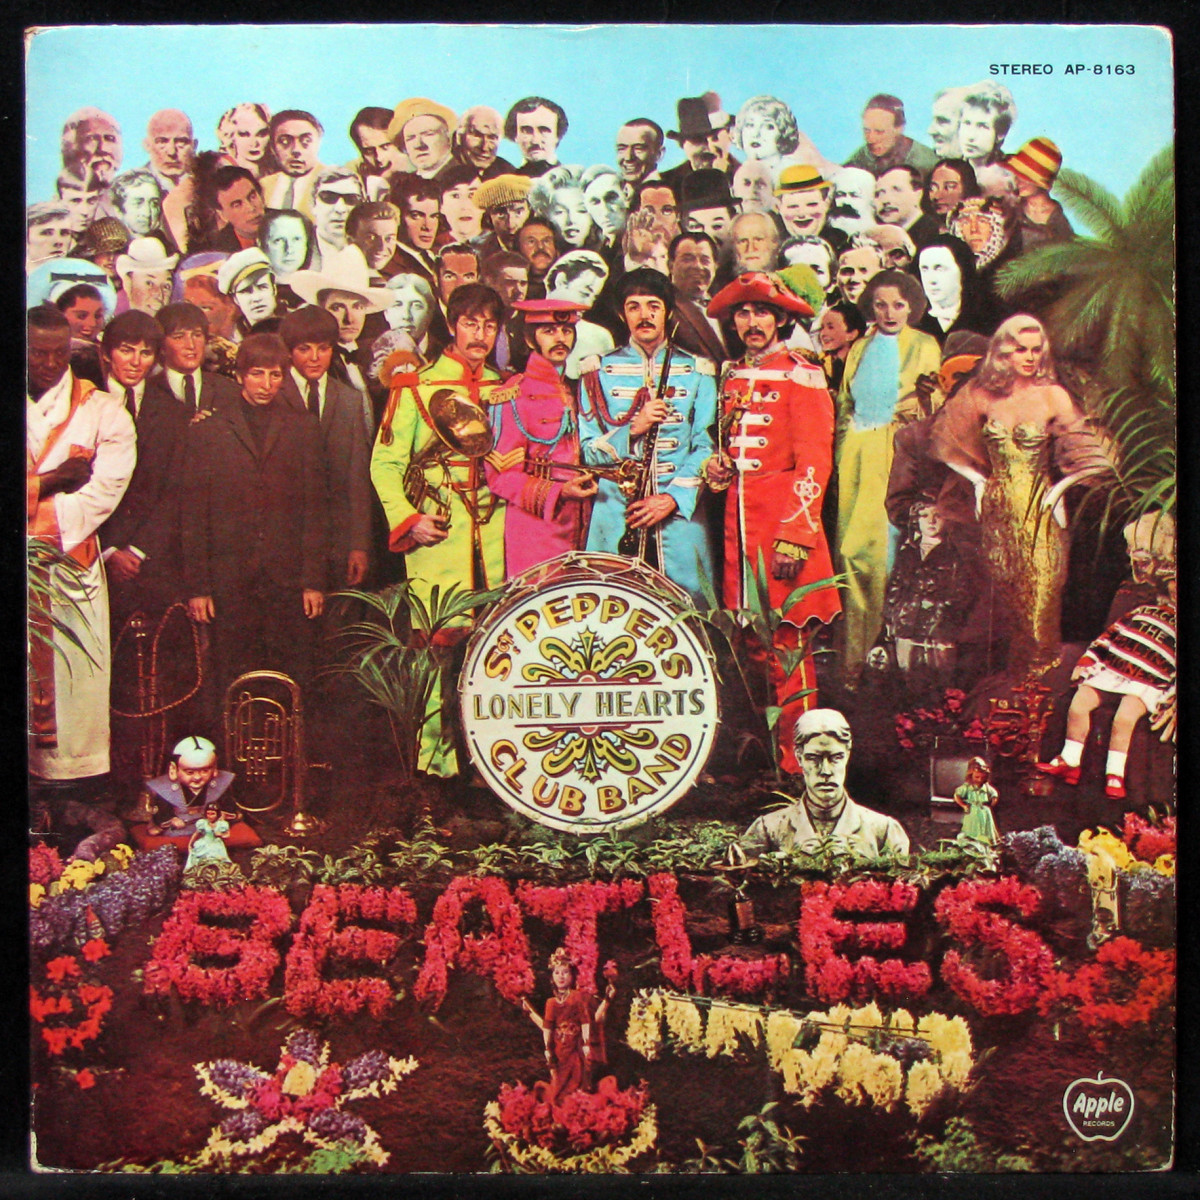 LP Beatles — Sgt. Pepper's Lonely Hearts Club Band фото